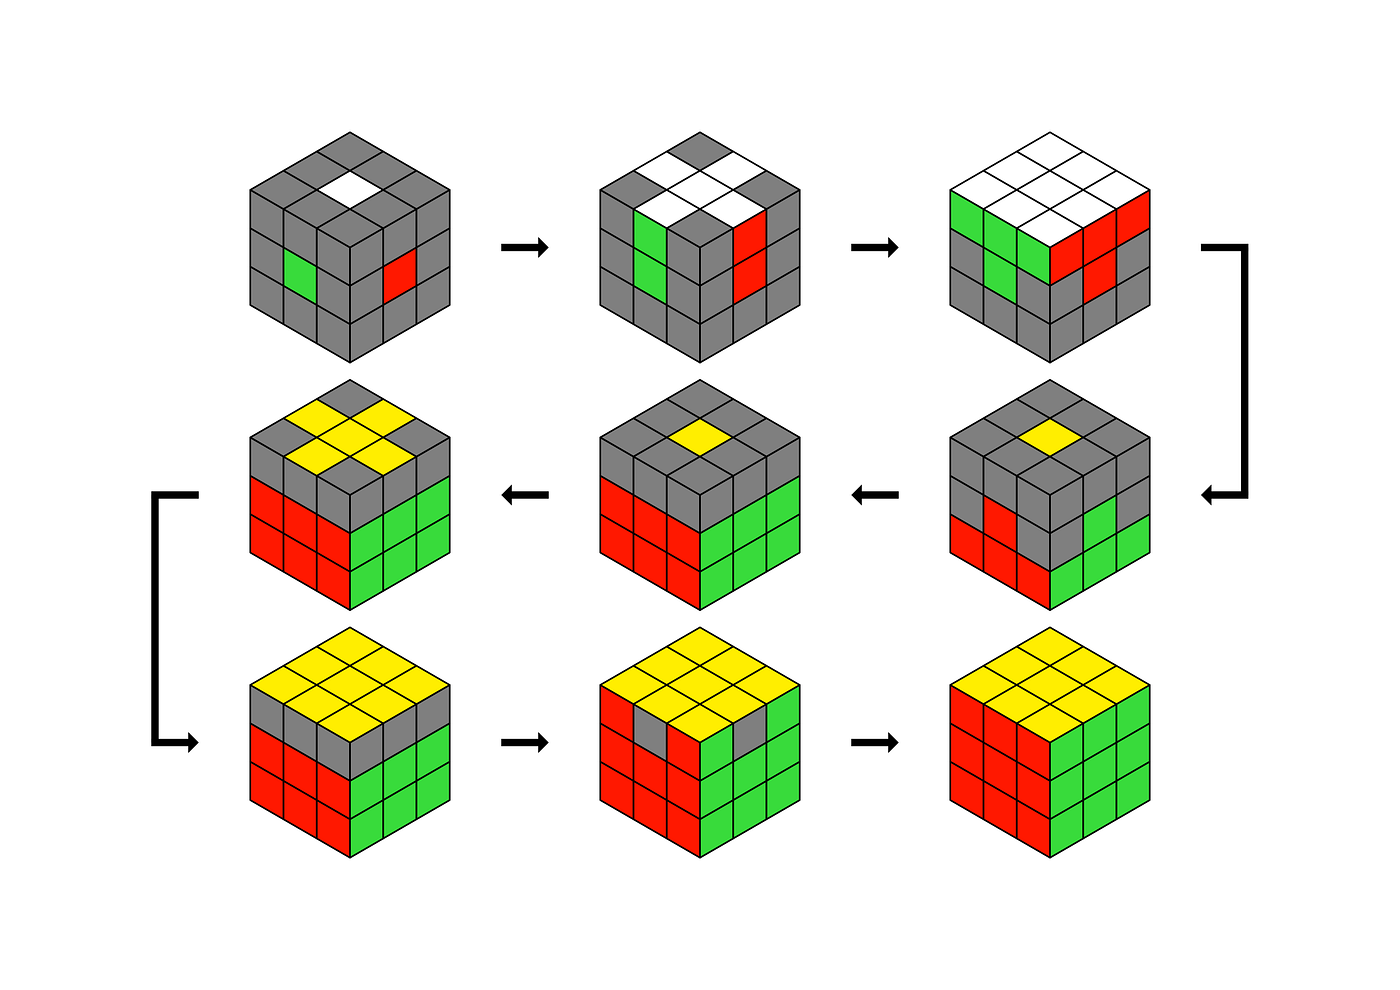 3x3 cube puzzle and learn the notation. - first side Solve the white face o...